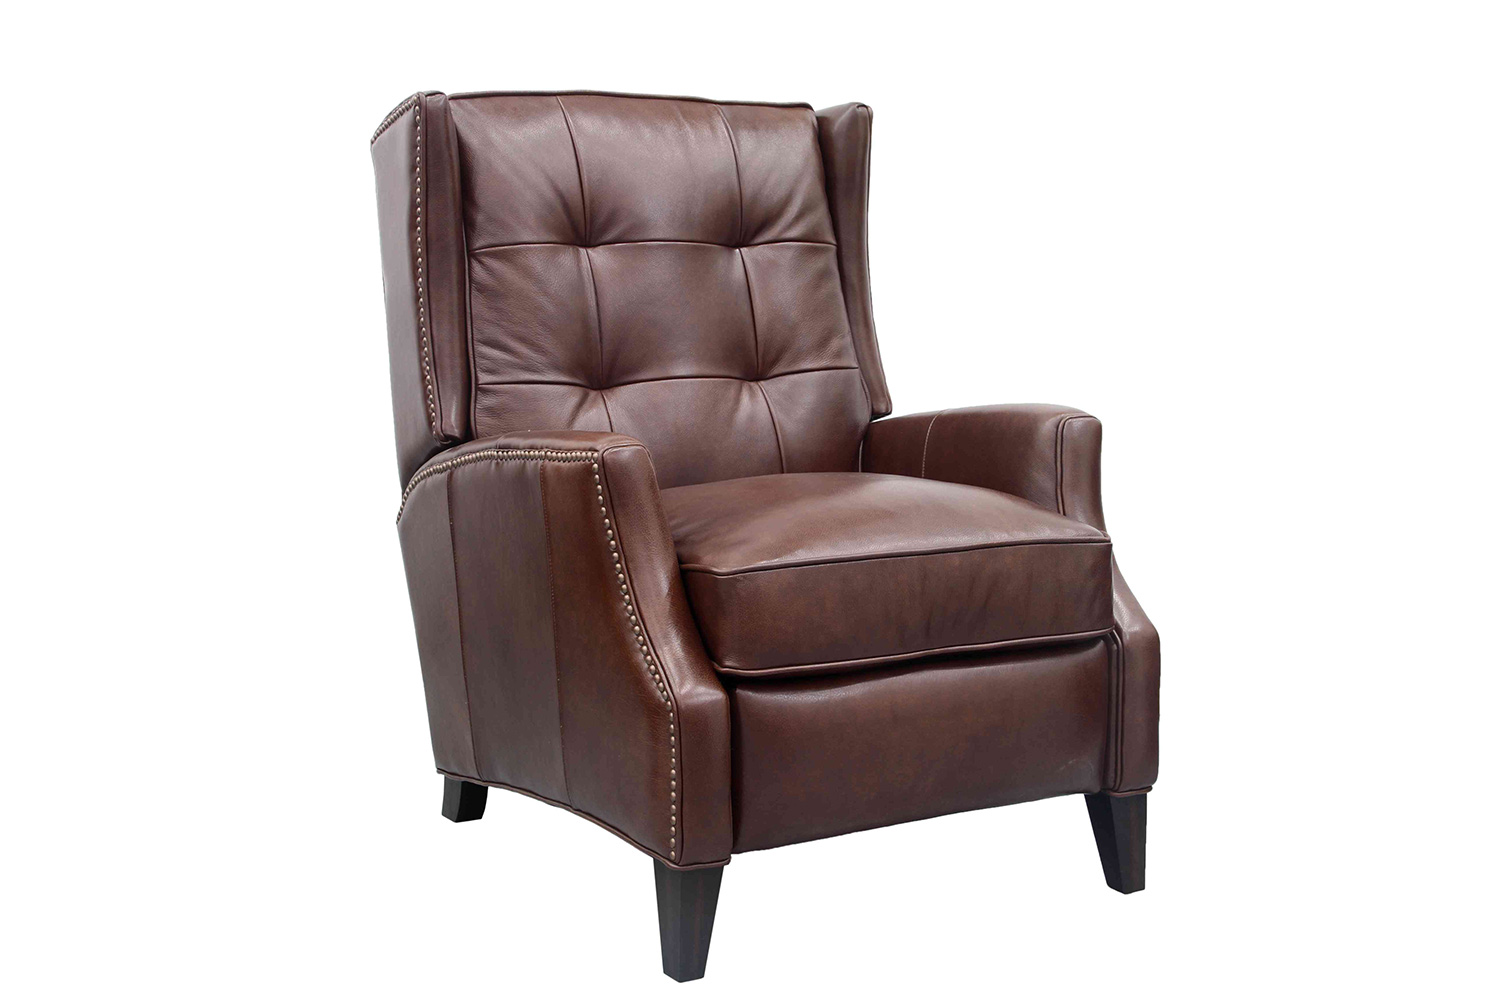 Barcalounger Lincoln Recliner Chair - Shoreham Chocolate/All Leather